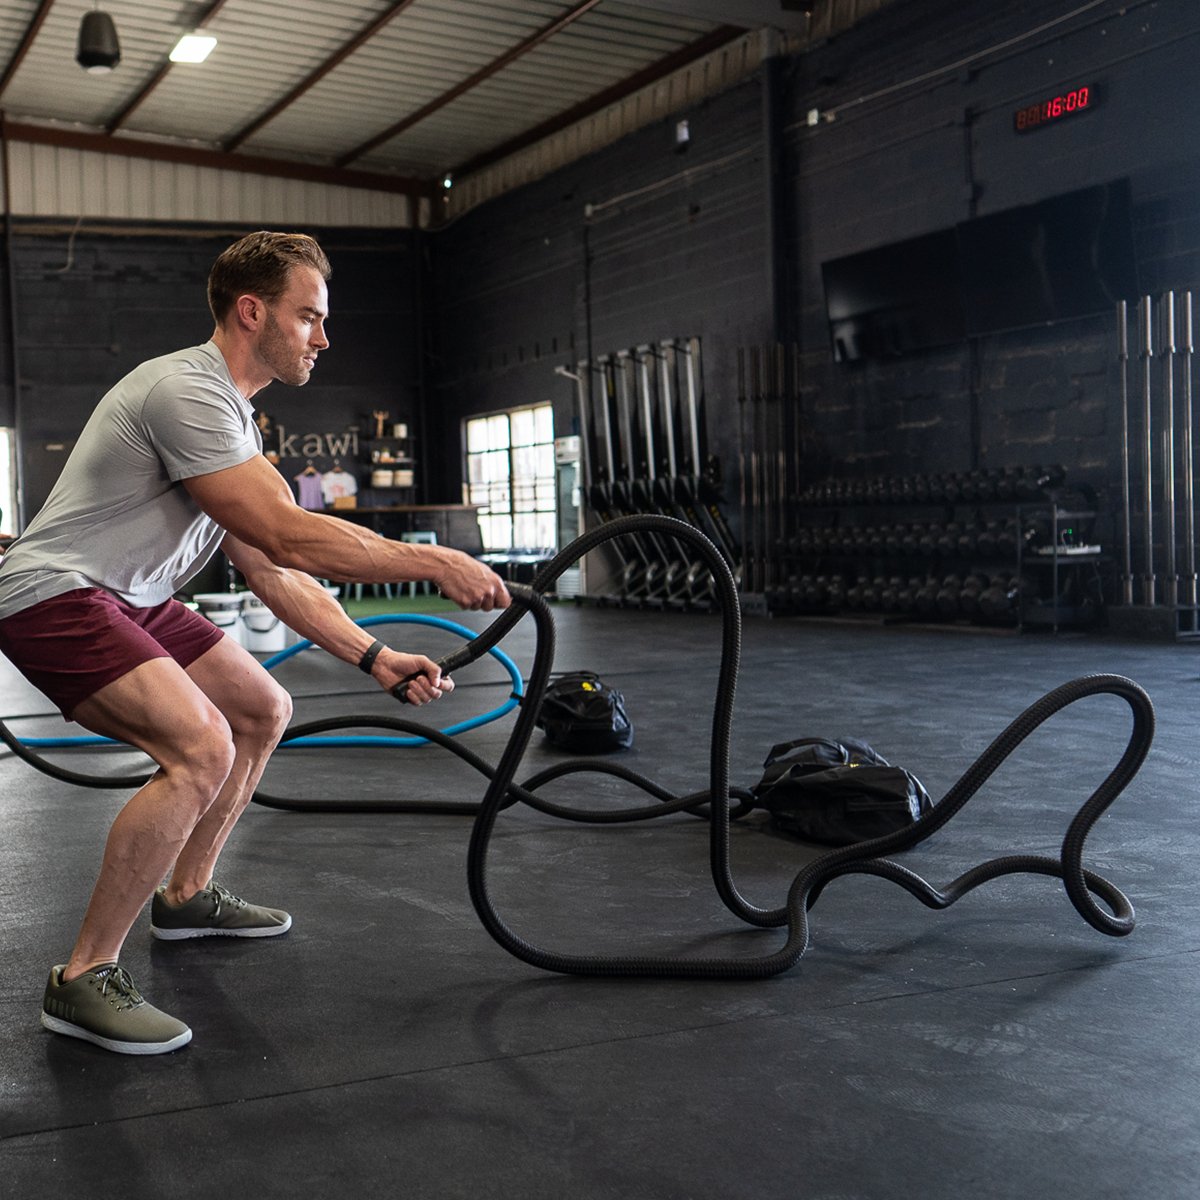 A group is pictured in a crossfit or garage gym using a hyper rope weighted battle rope in a small space